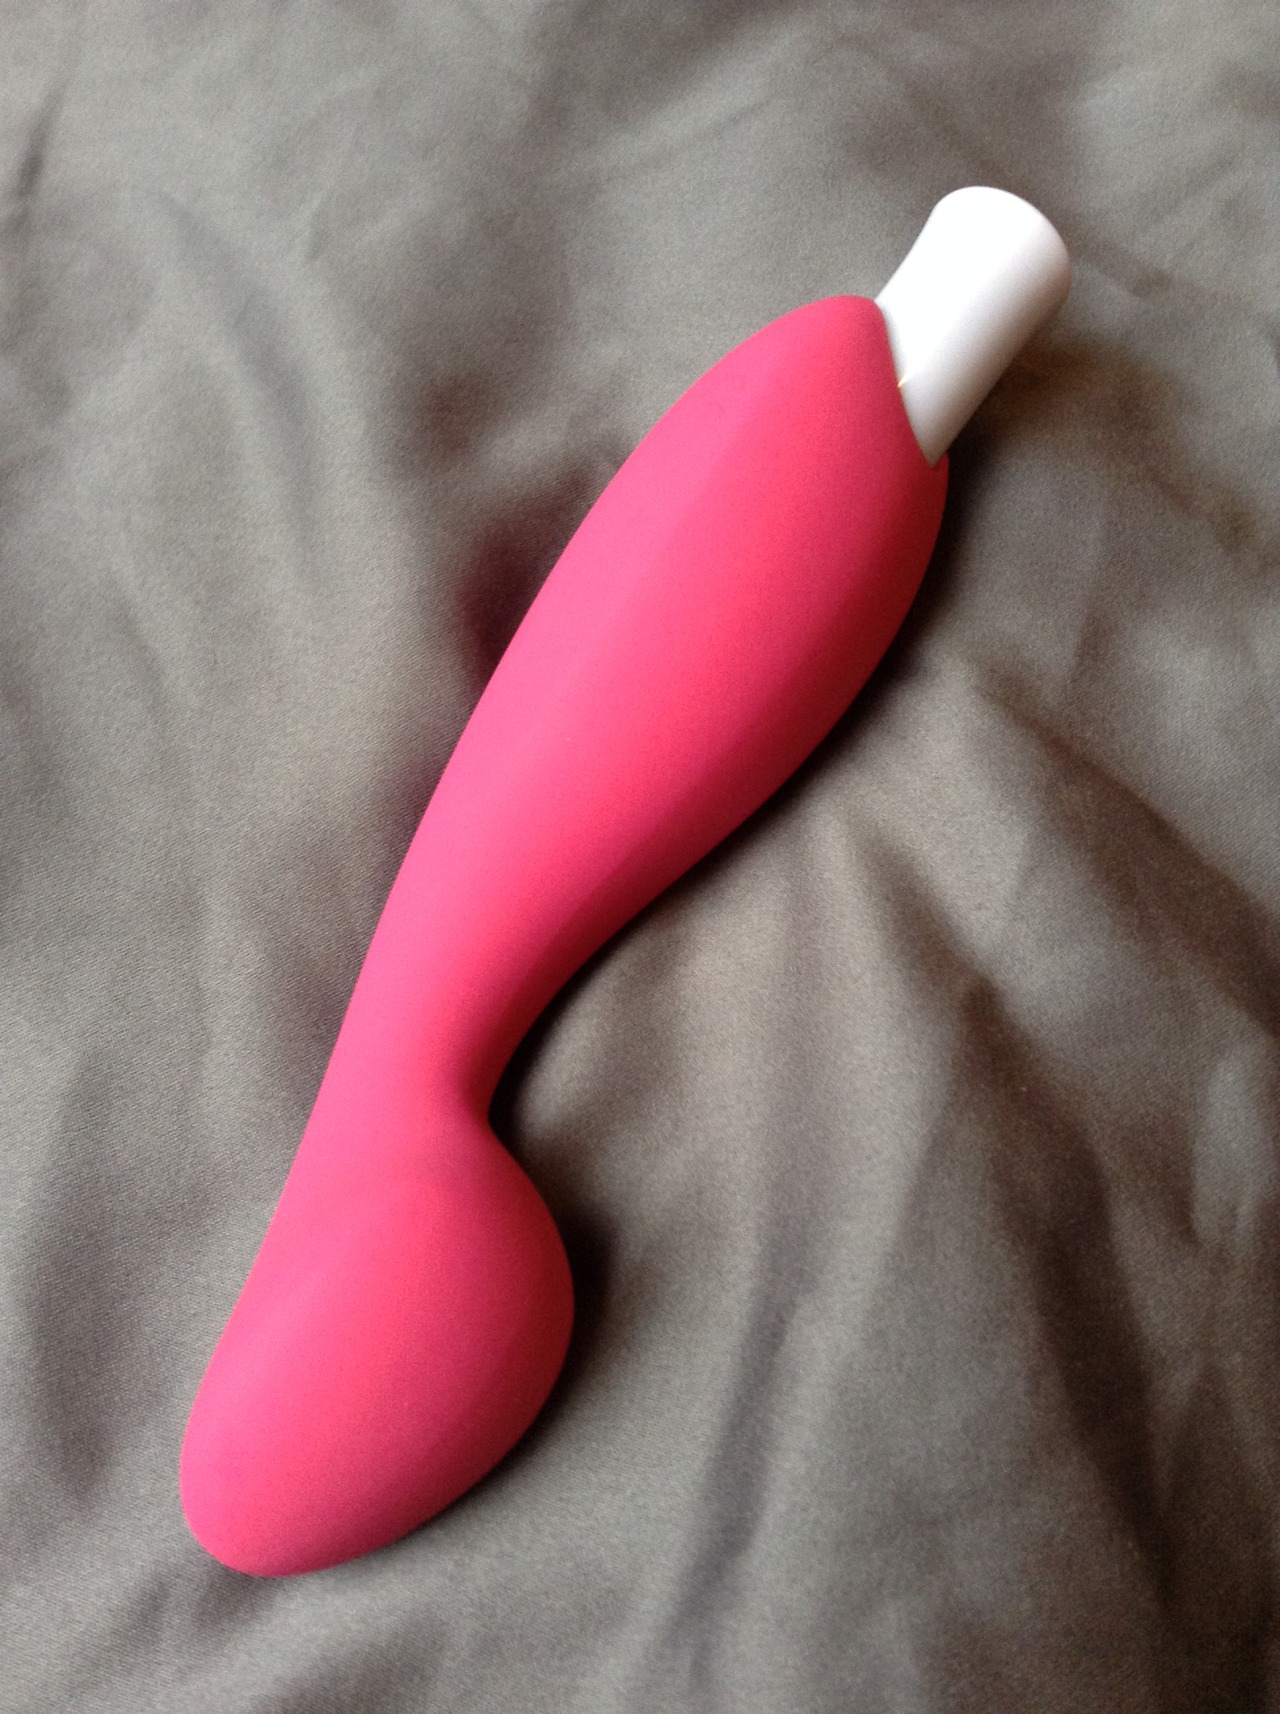 Pillow Princess Reviews — Its a pleasure, mate a review of the We-Vibe... image